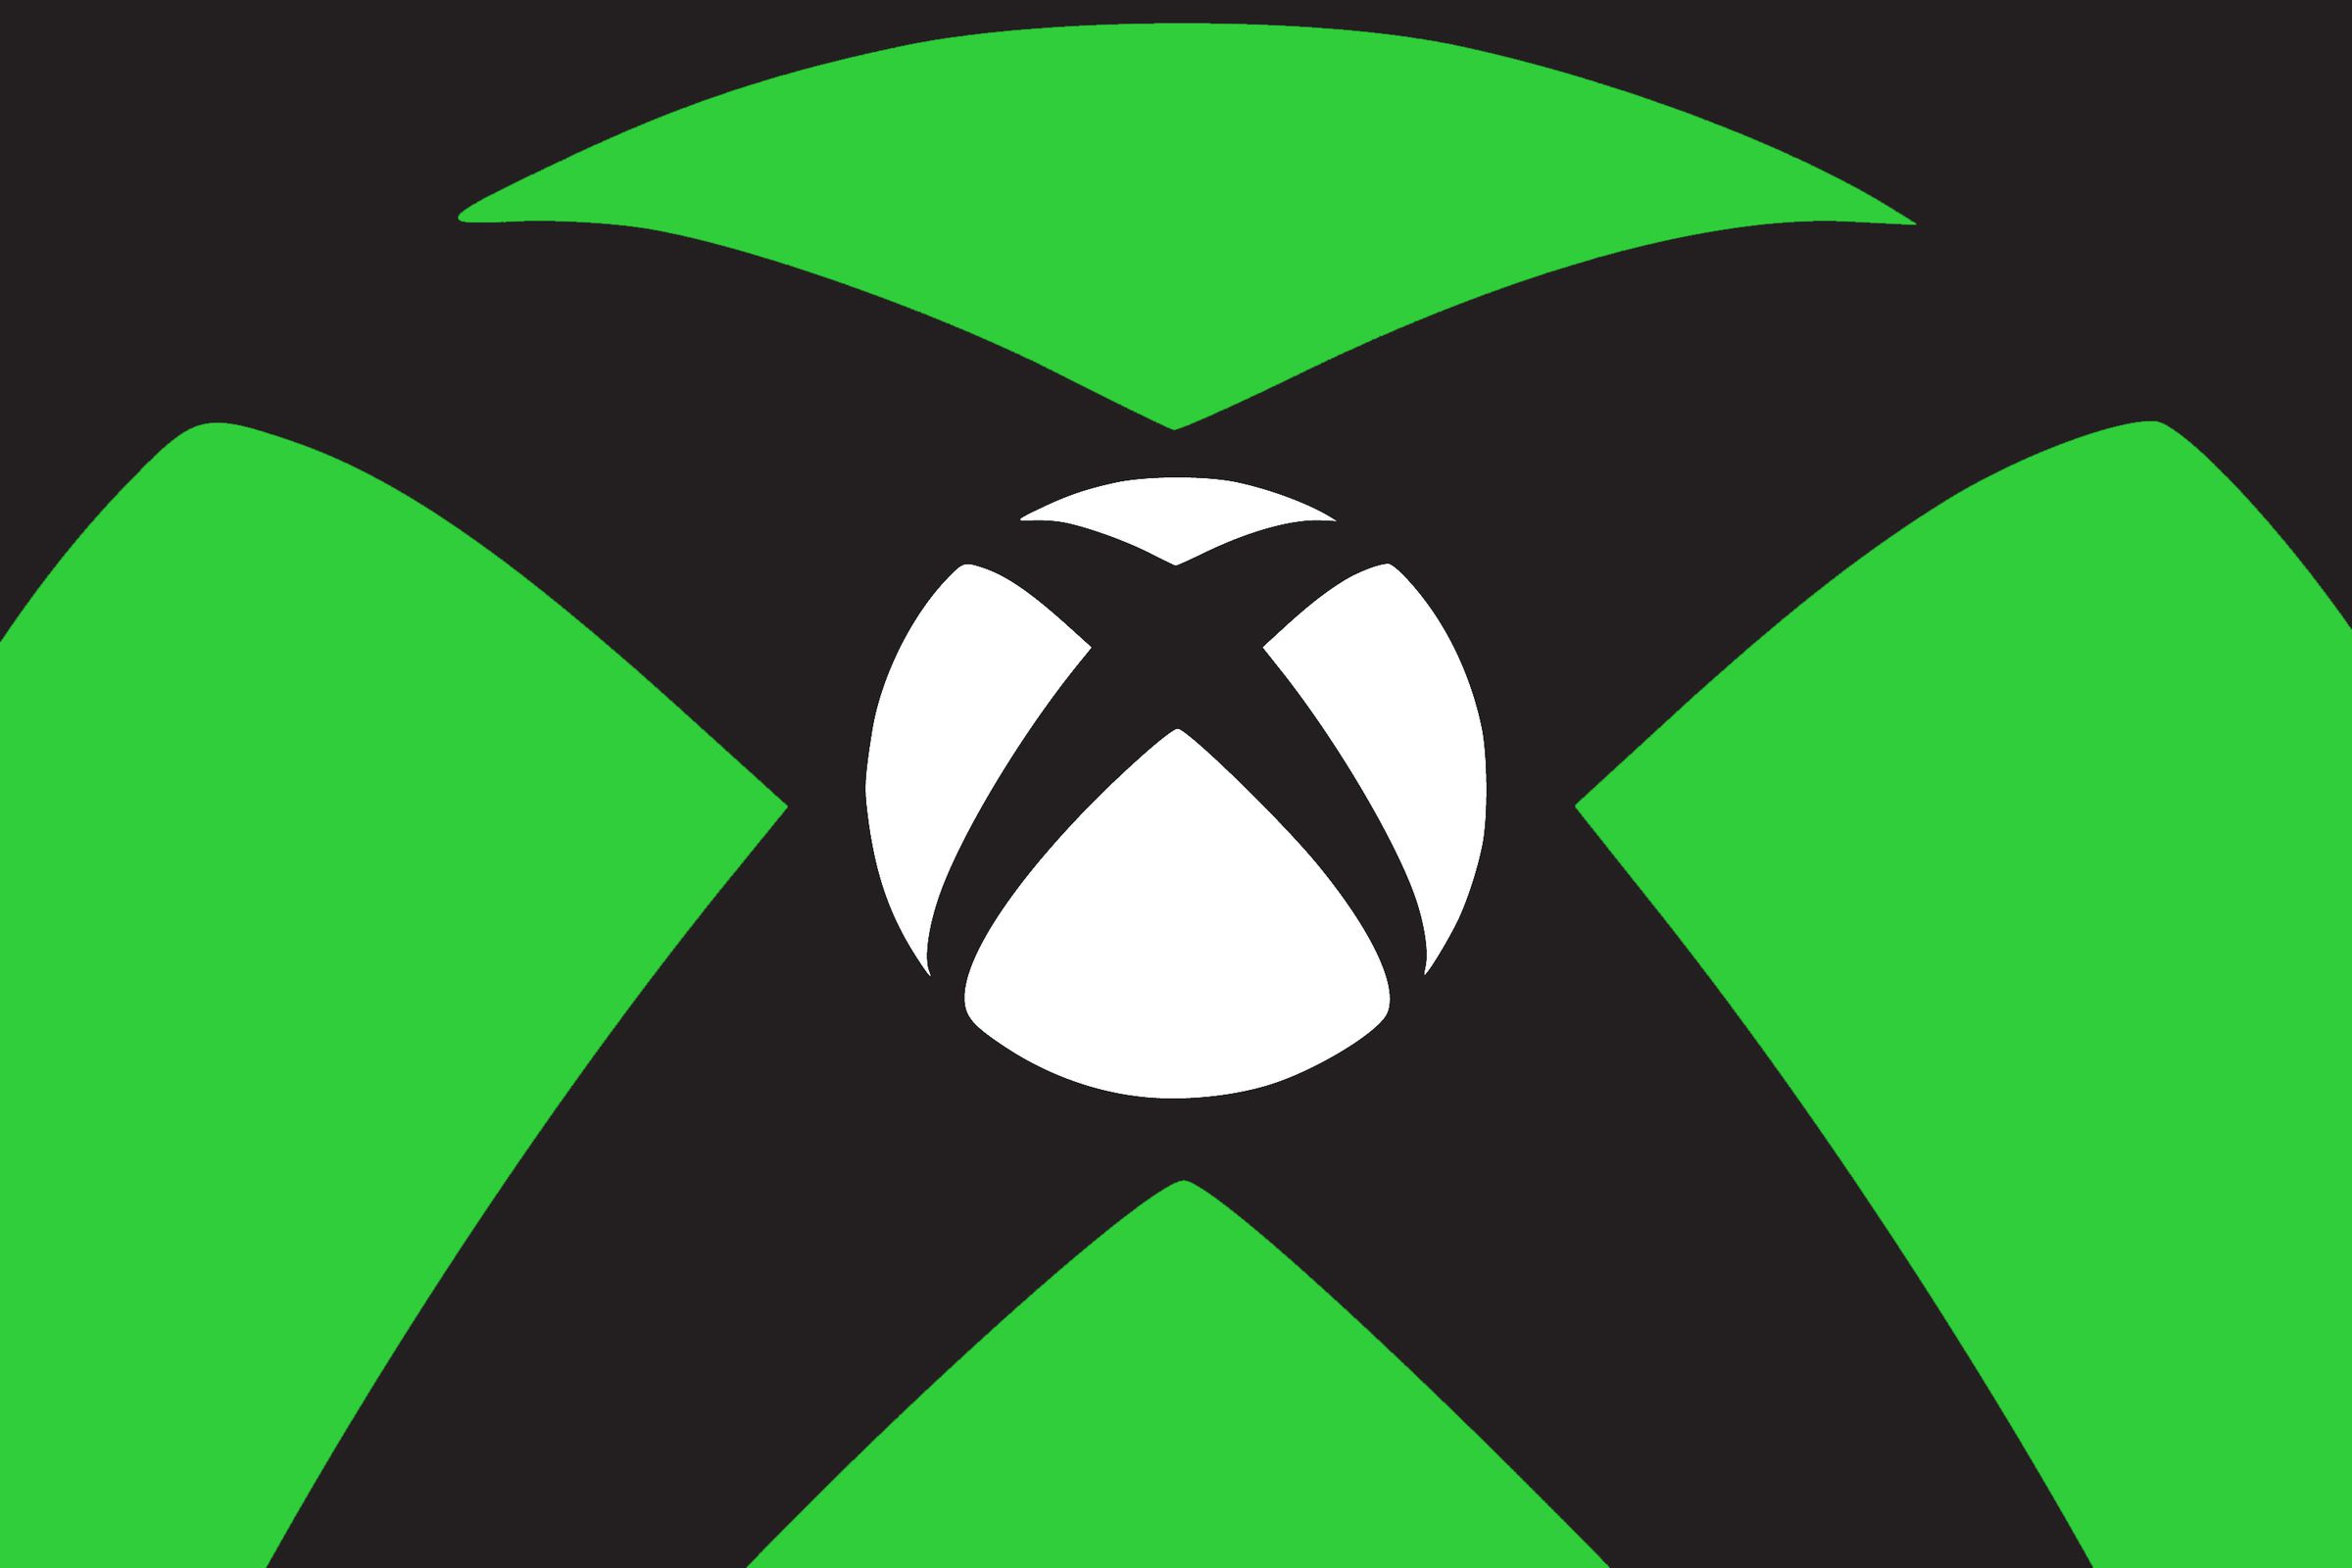 Microsoft exec hints at free ad-supported Xbox Cloud Gaming - The Verge